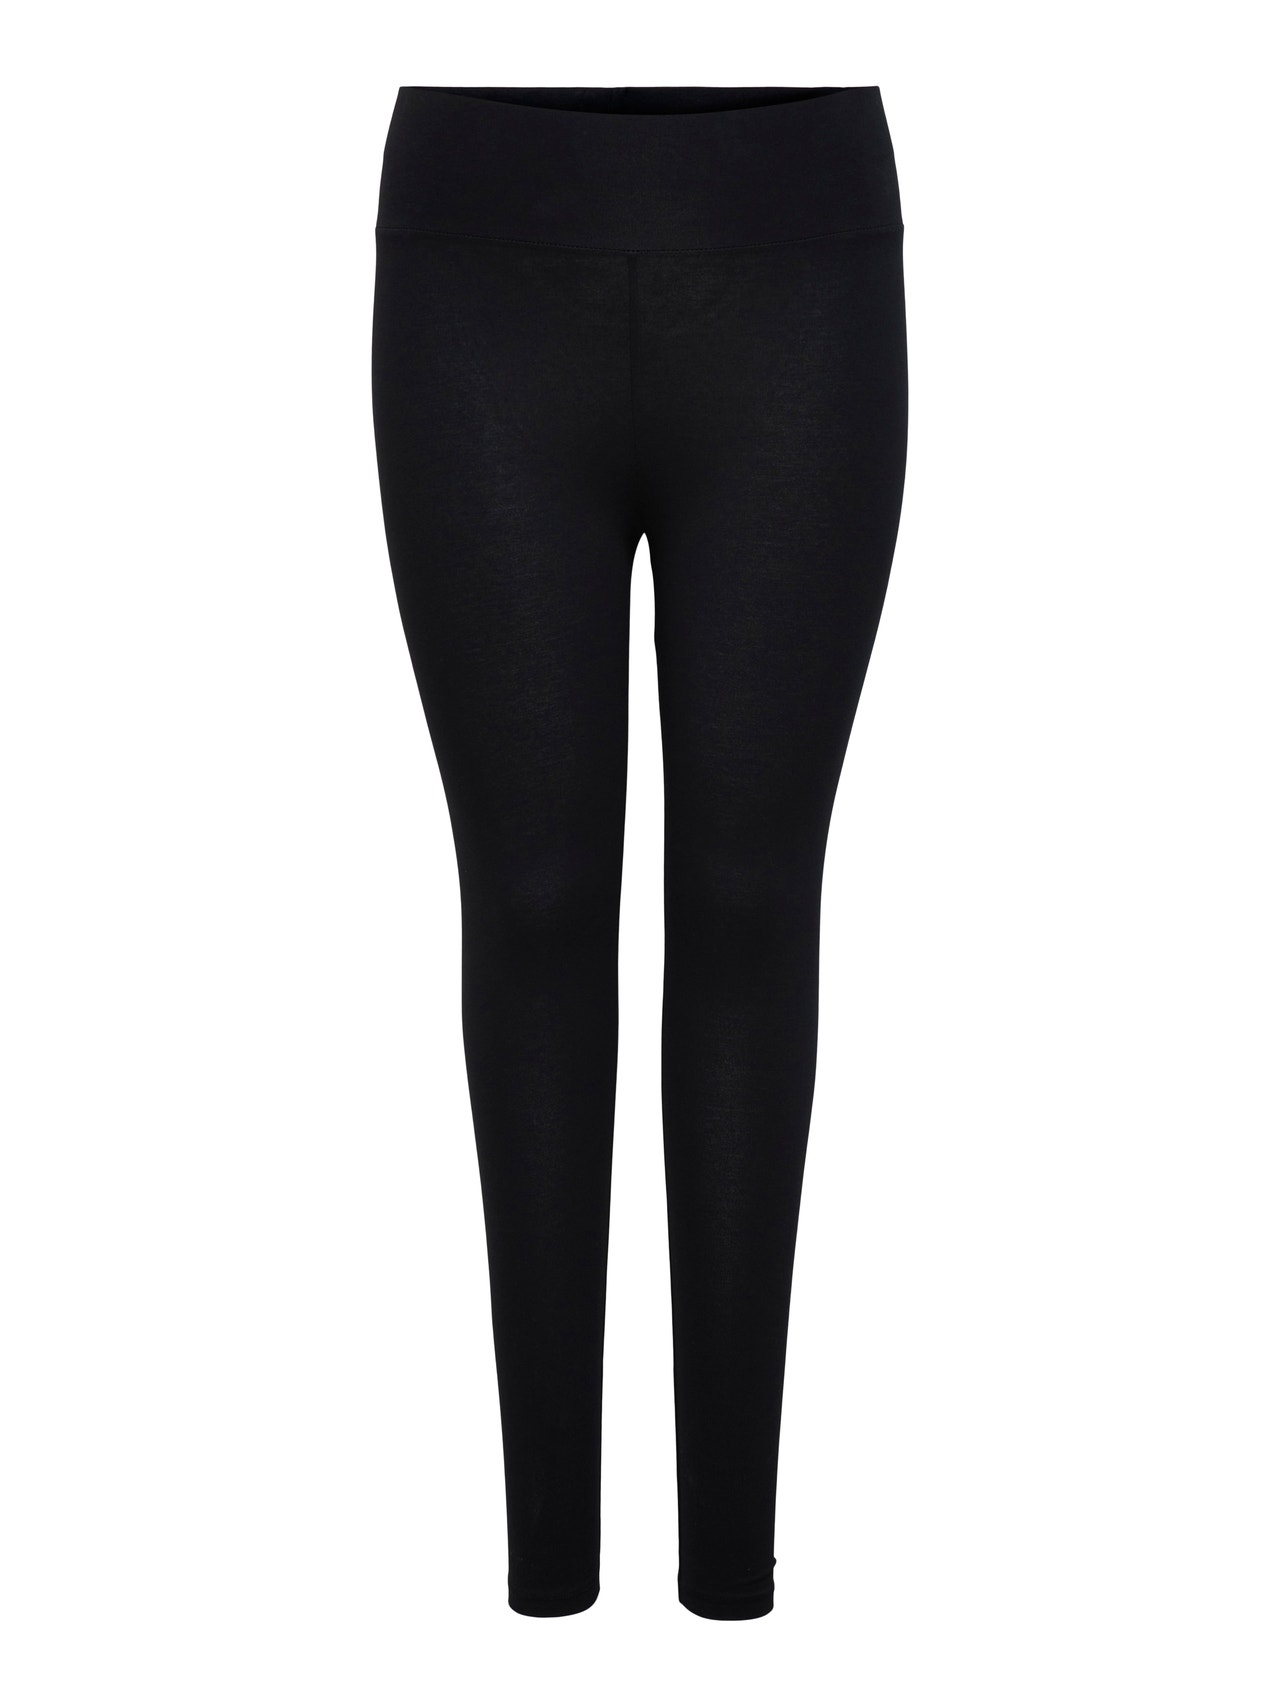 ONLY Slim Fit Hohe Taille Leggings -Black - 15246800